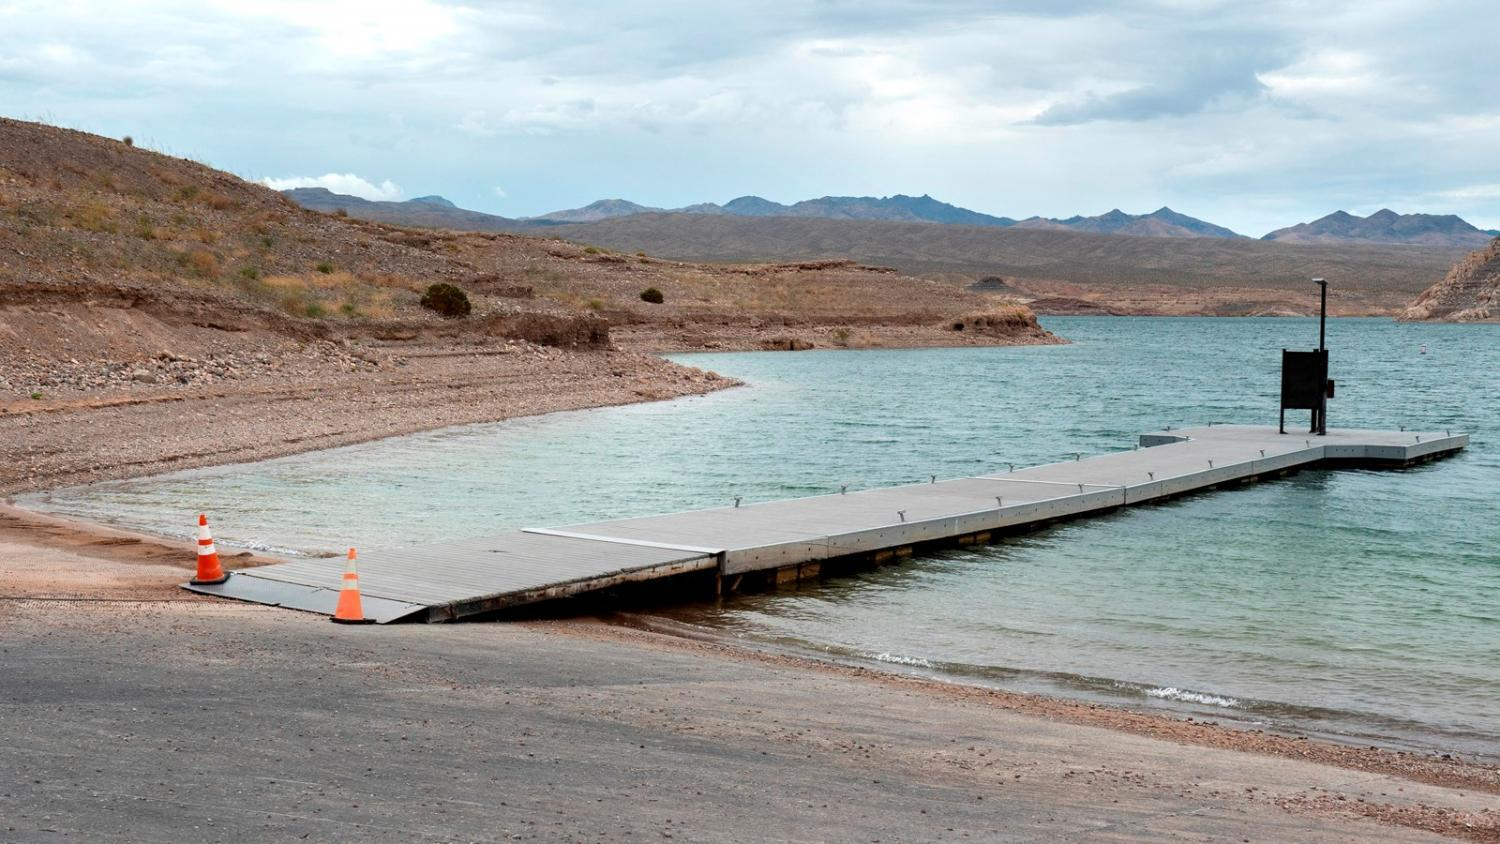 Lake Mead Boat Ramps to Receive 30 Million in Disaster Recovery